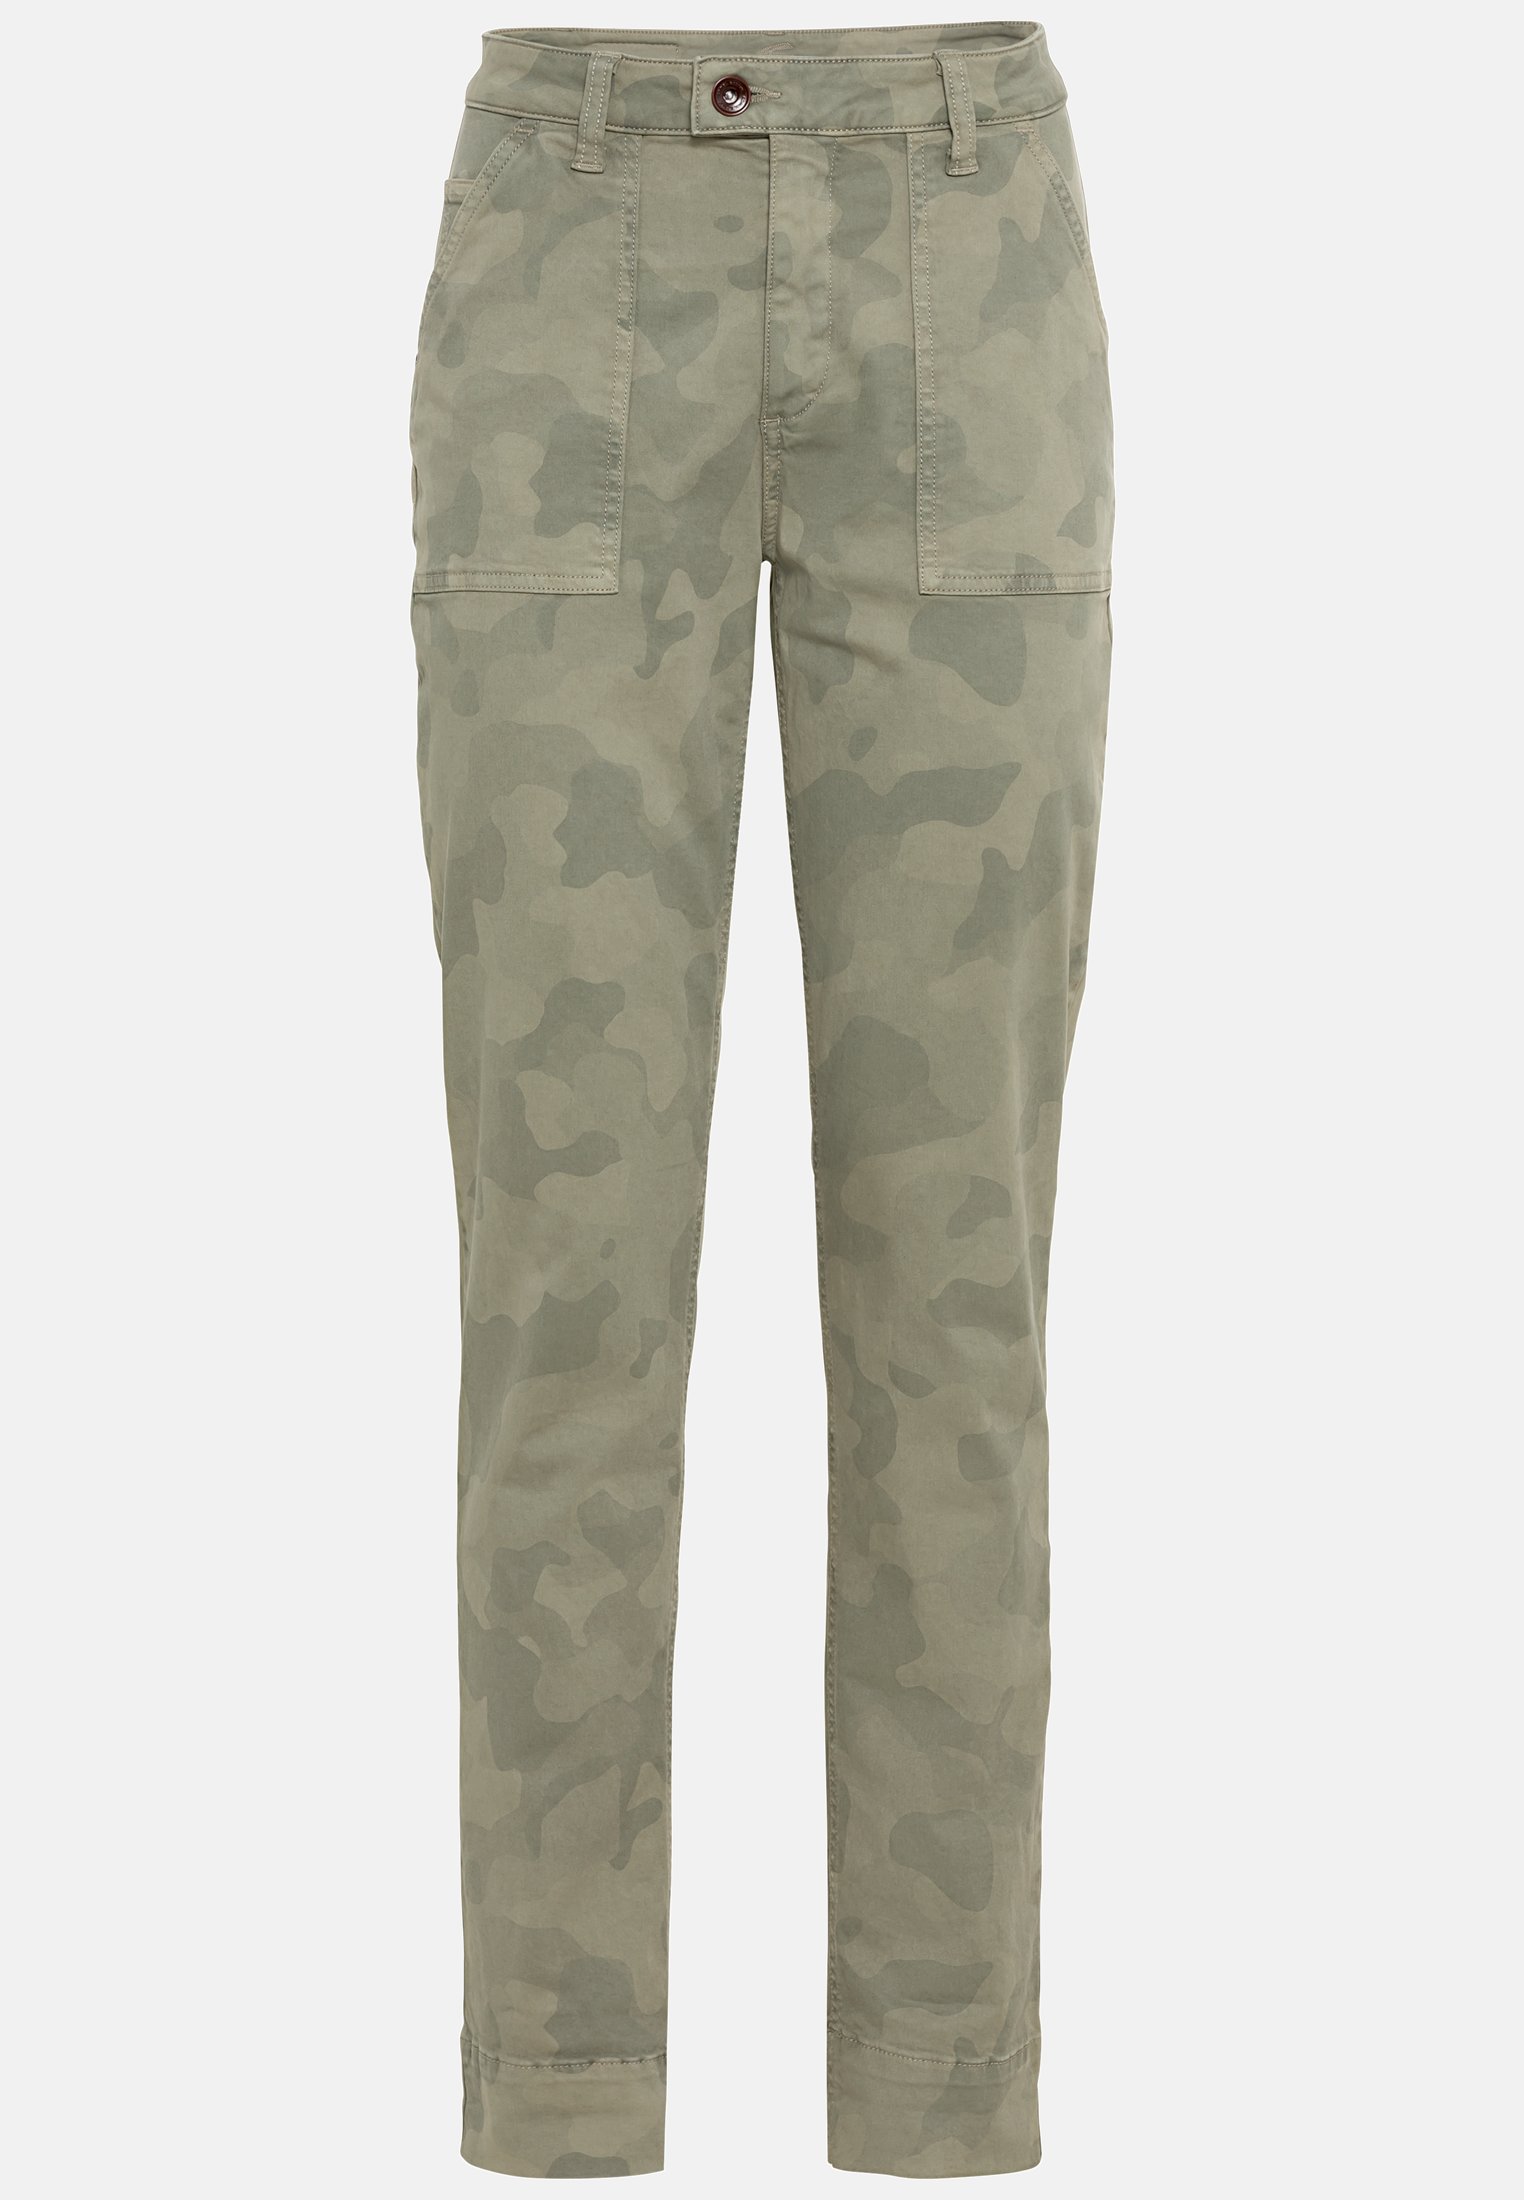 Trousers for Damen in Khaki | 26/30 | camel active